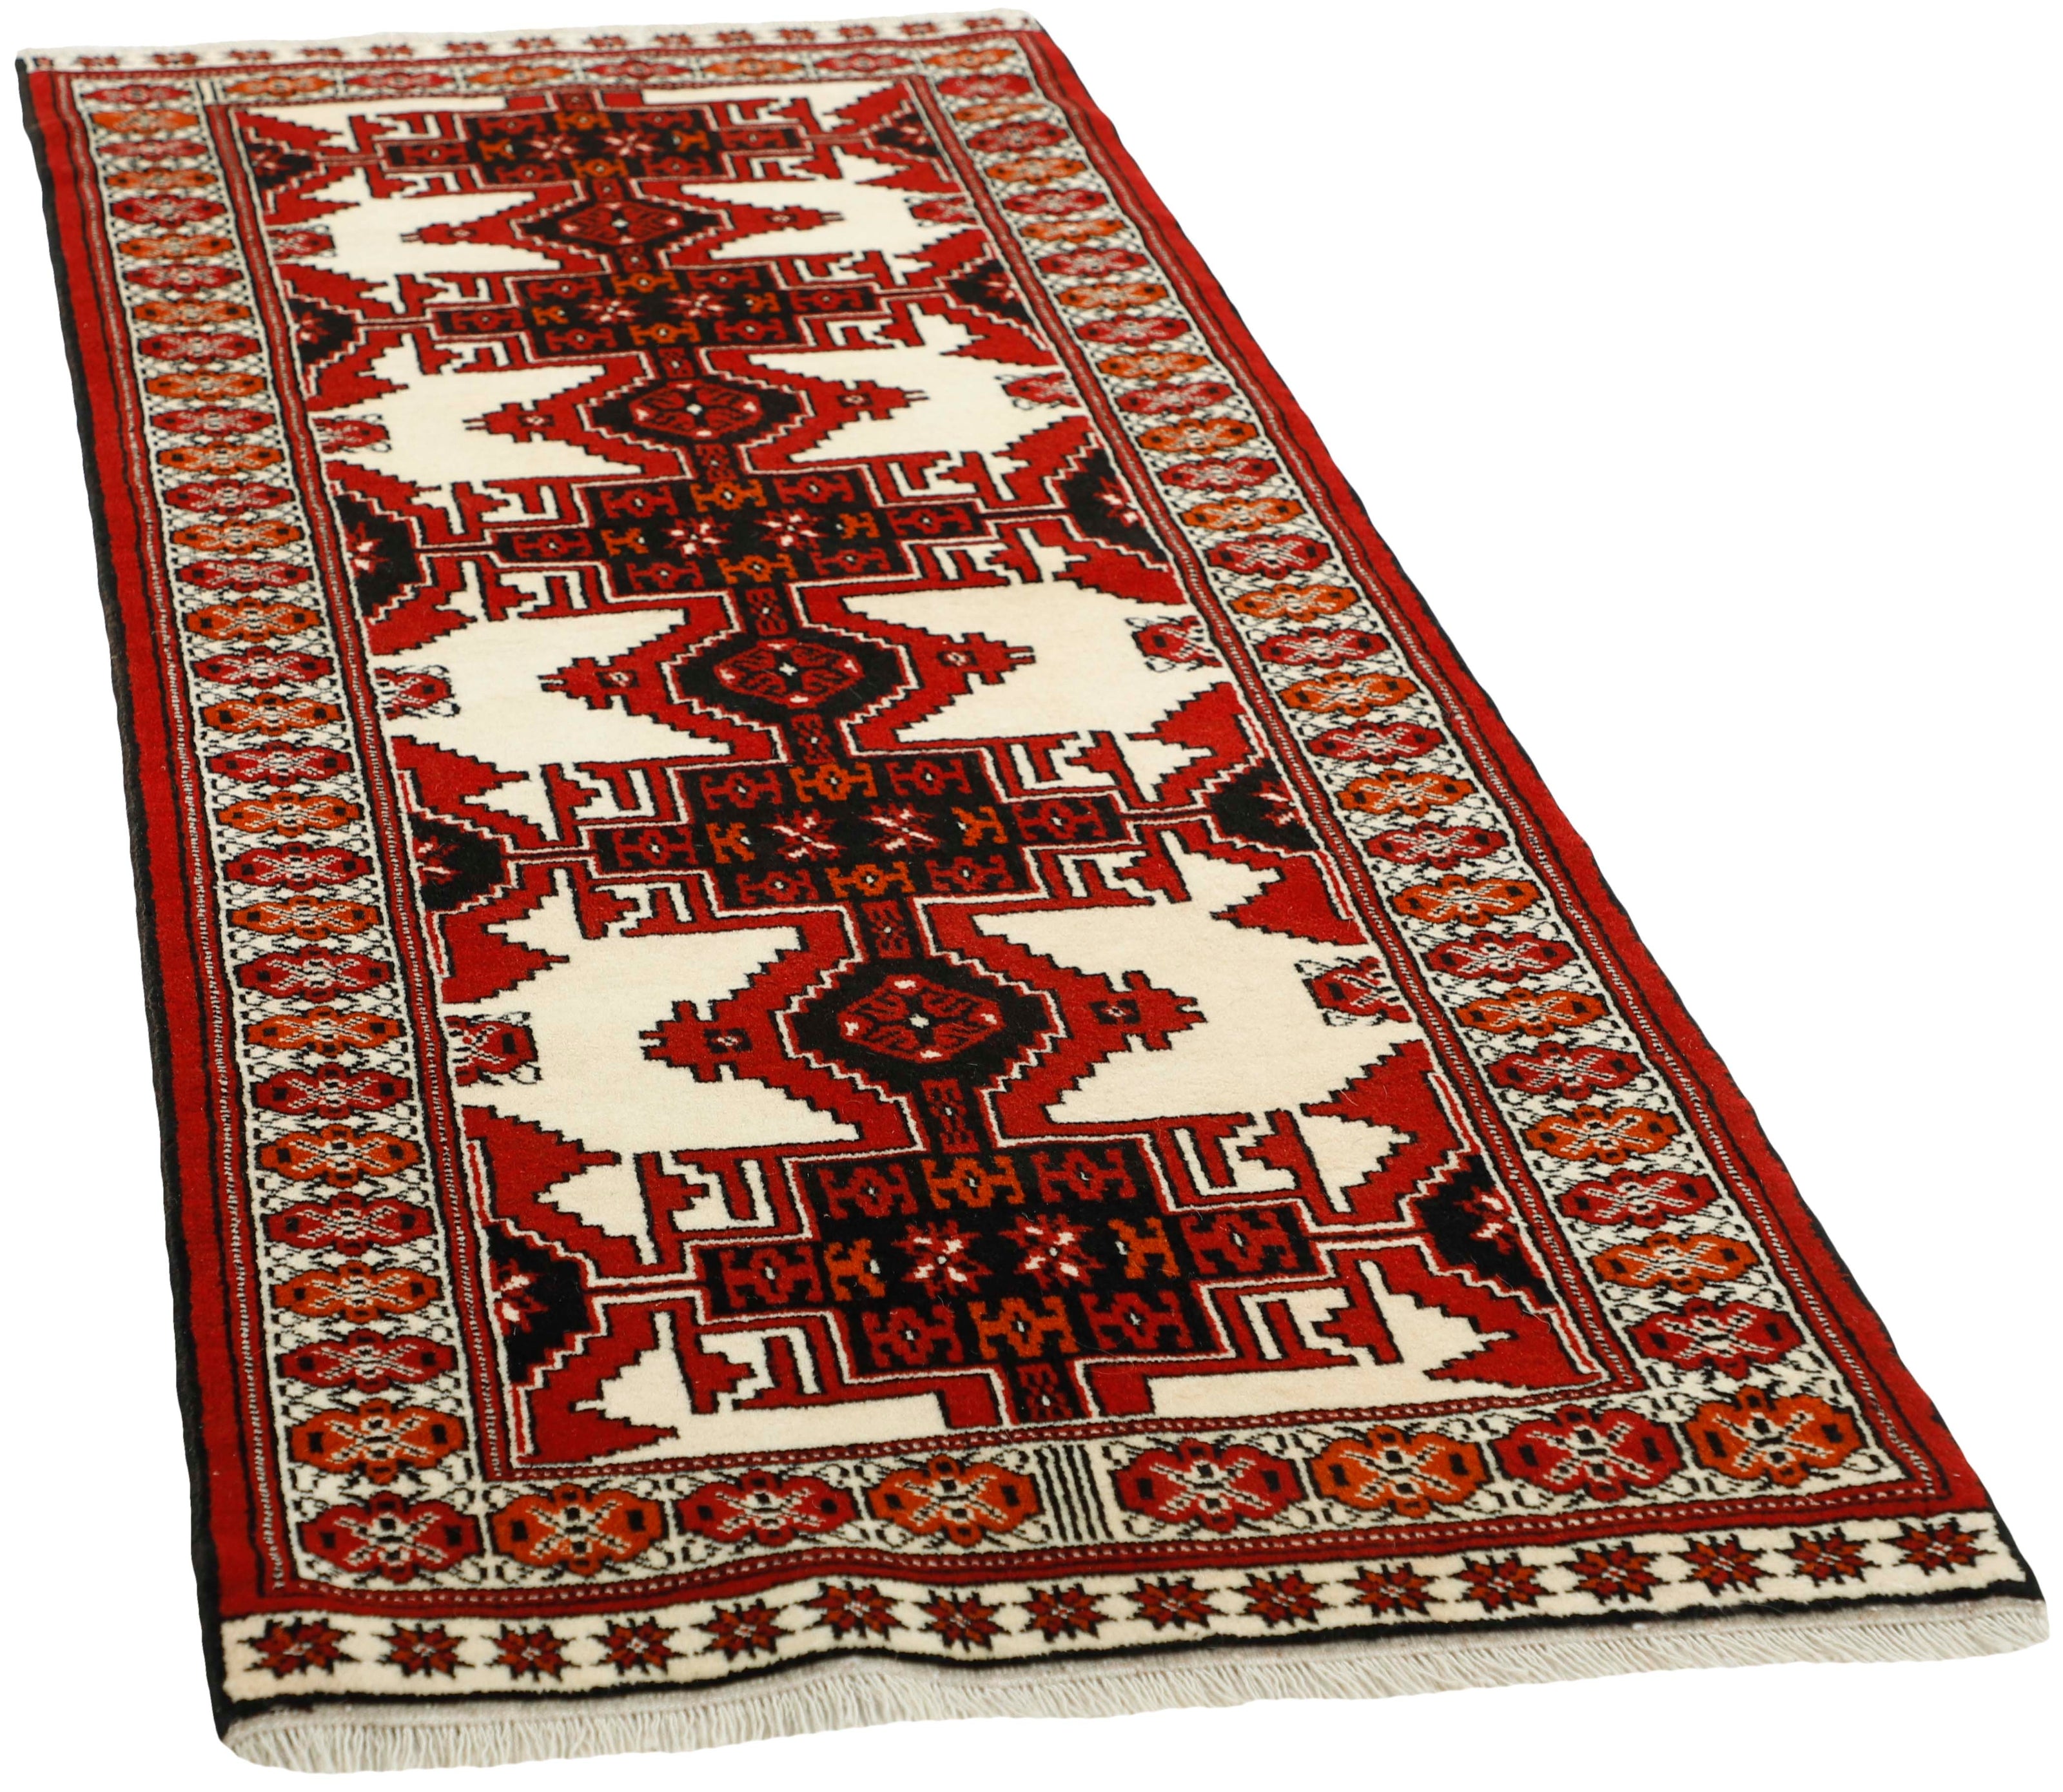  red and black persian runner